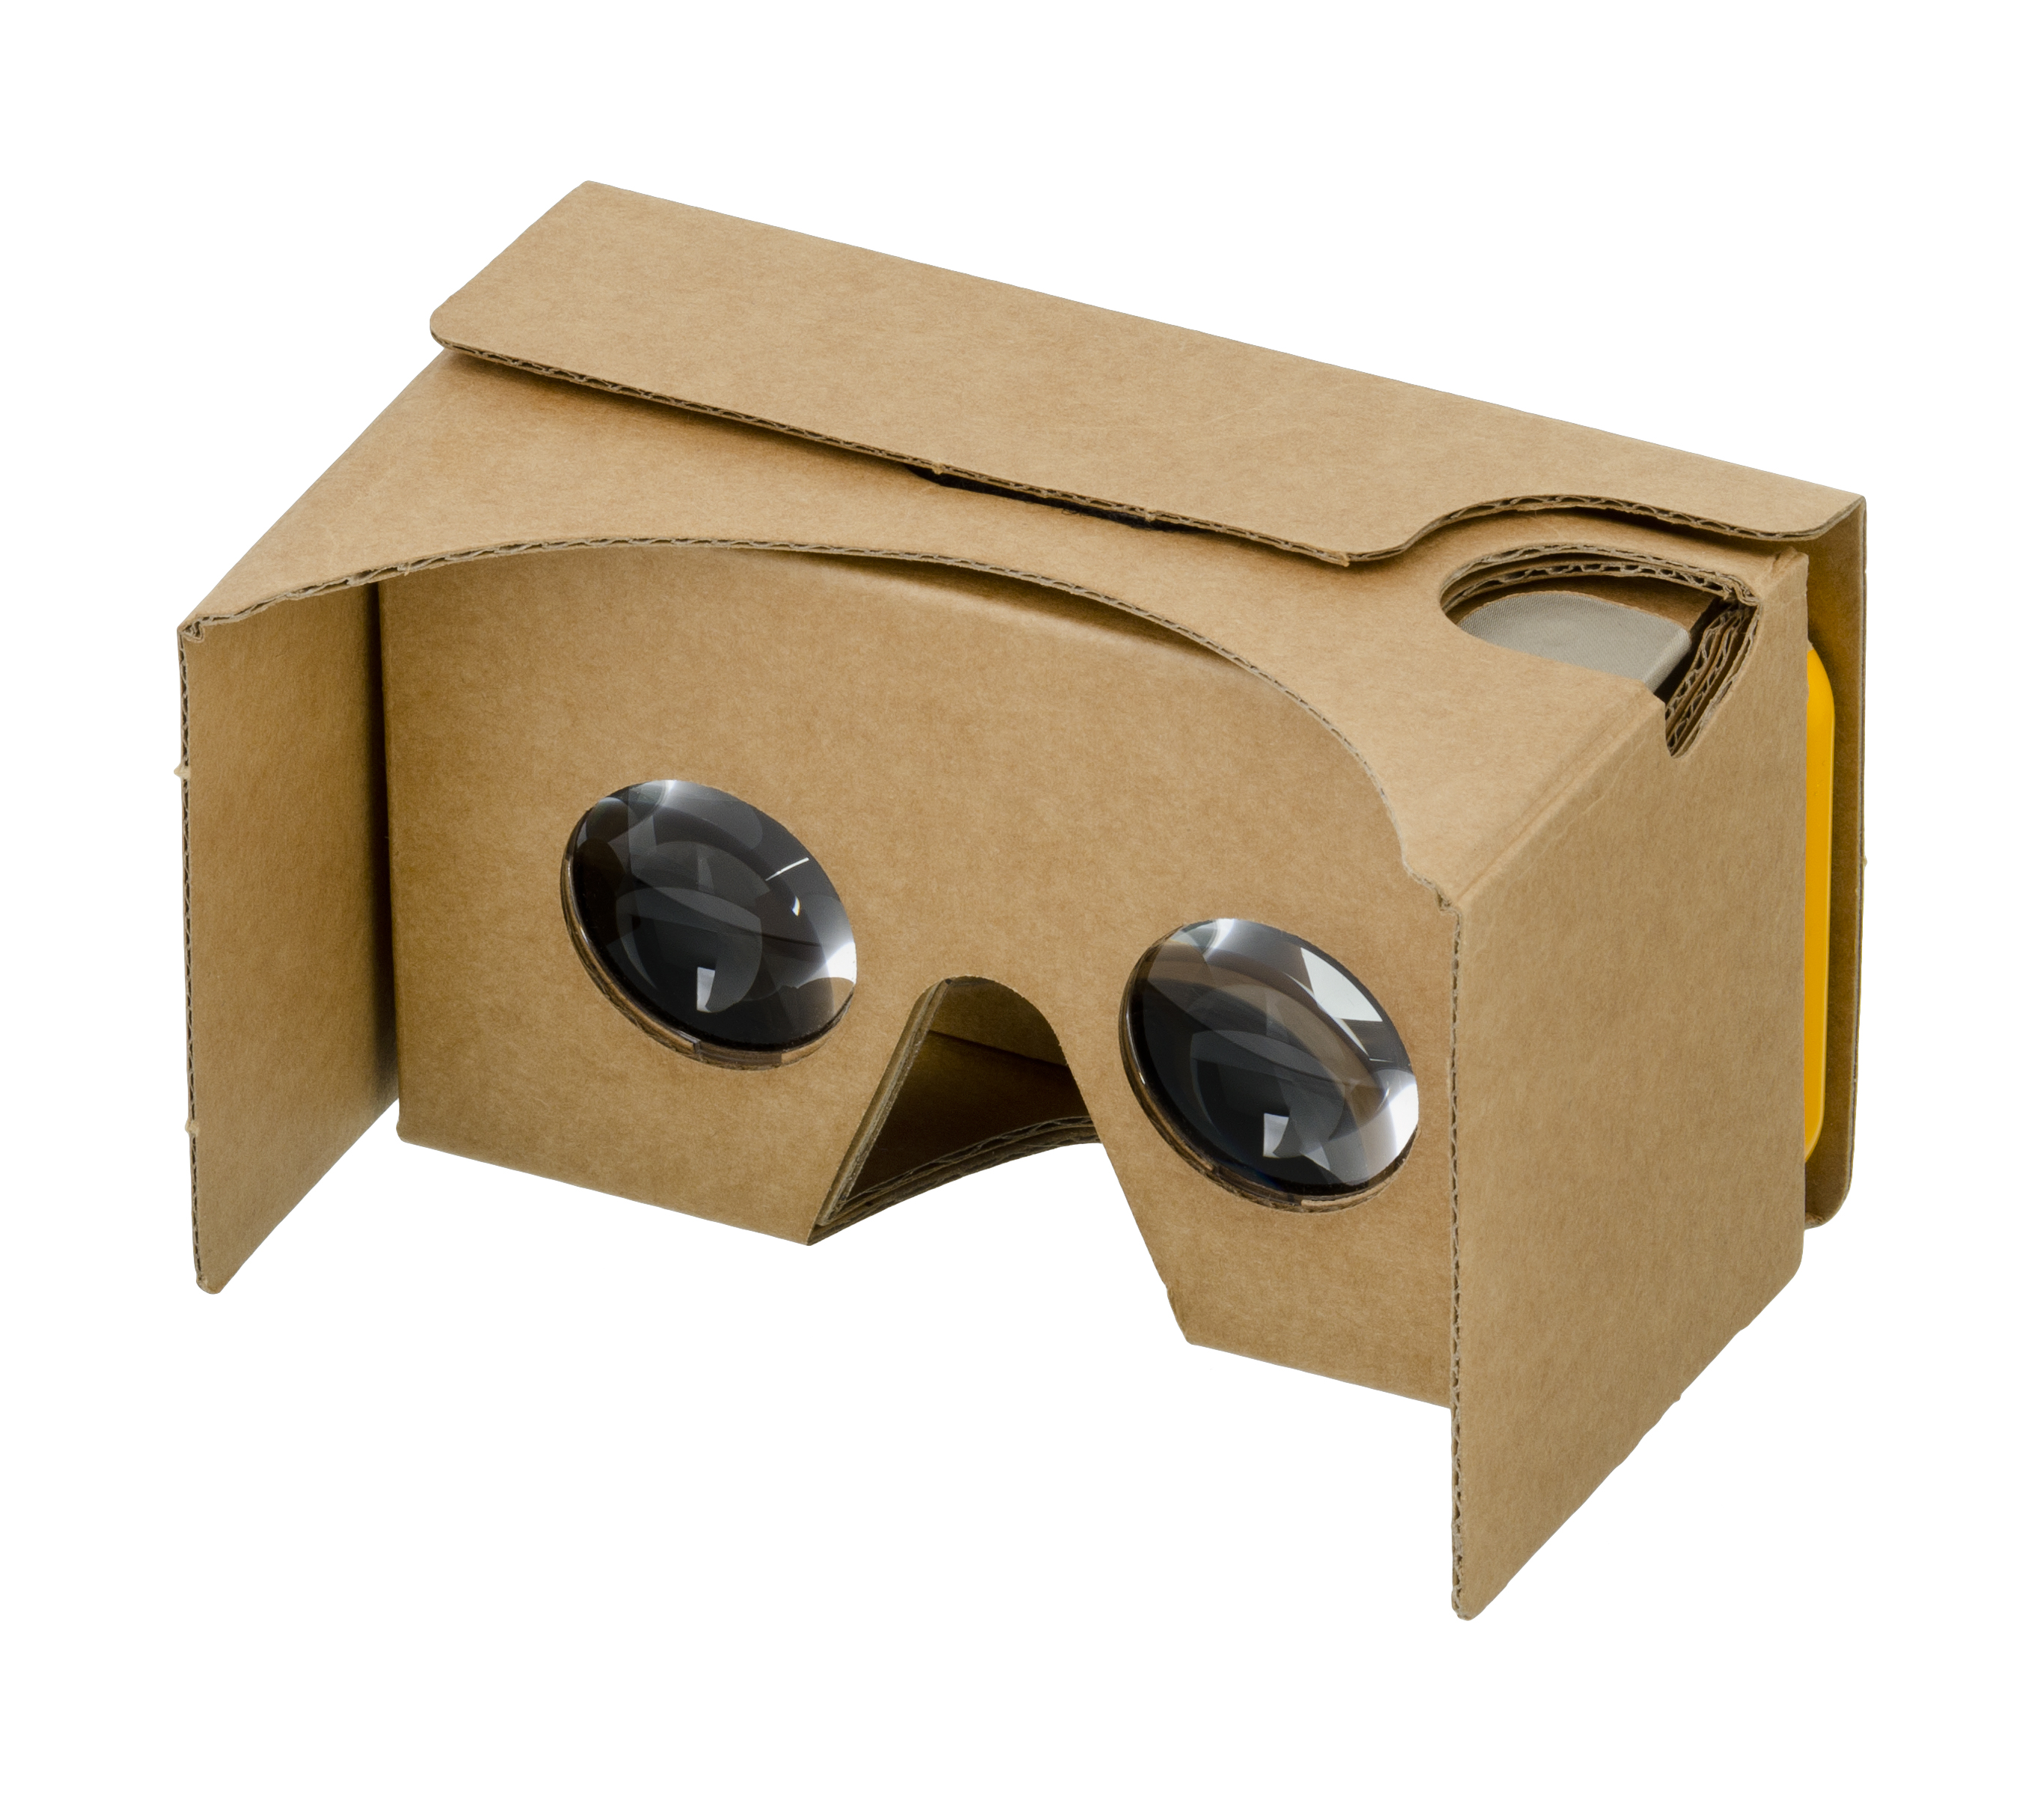 Photograph of a Google Cardboard viewer, a small cardboard box with two eye holes and lens that let the viewer look inside of the box to see their smartphone.